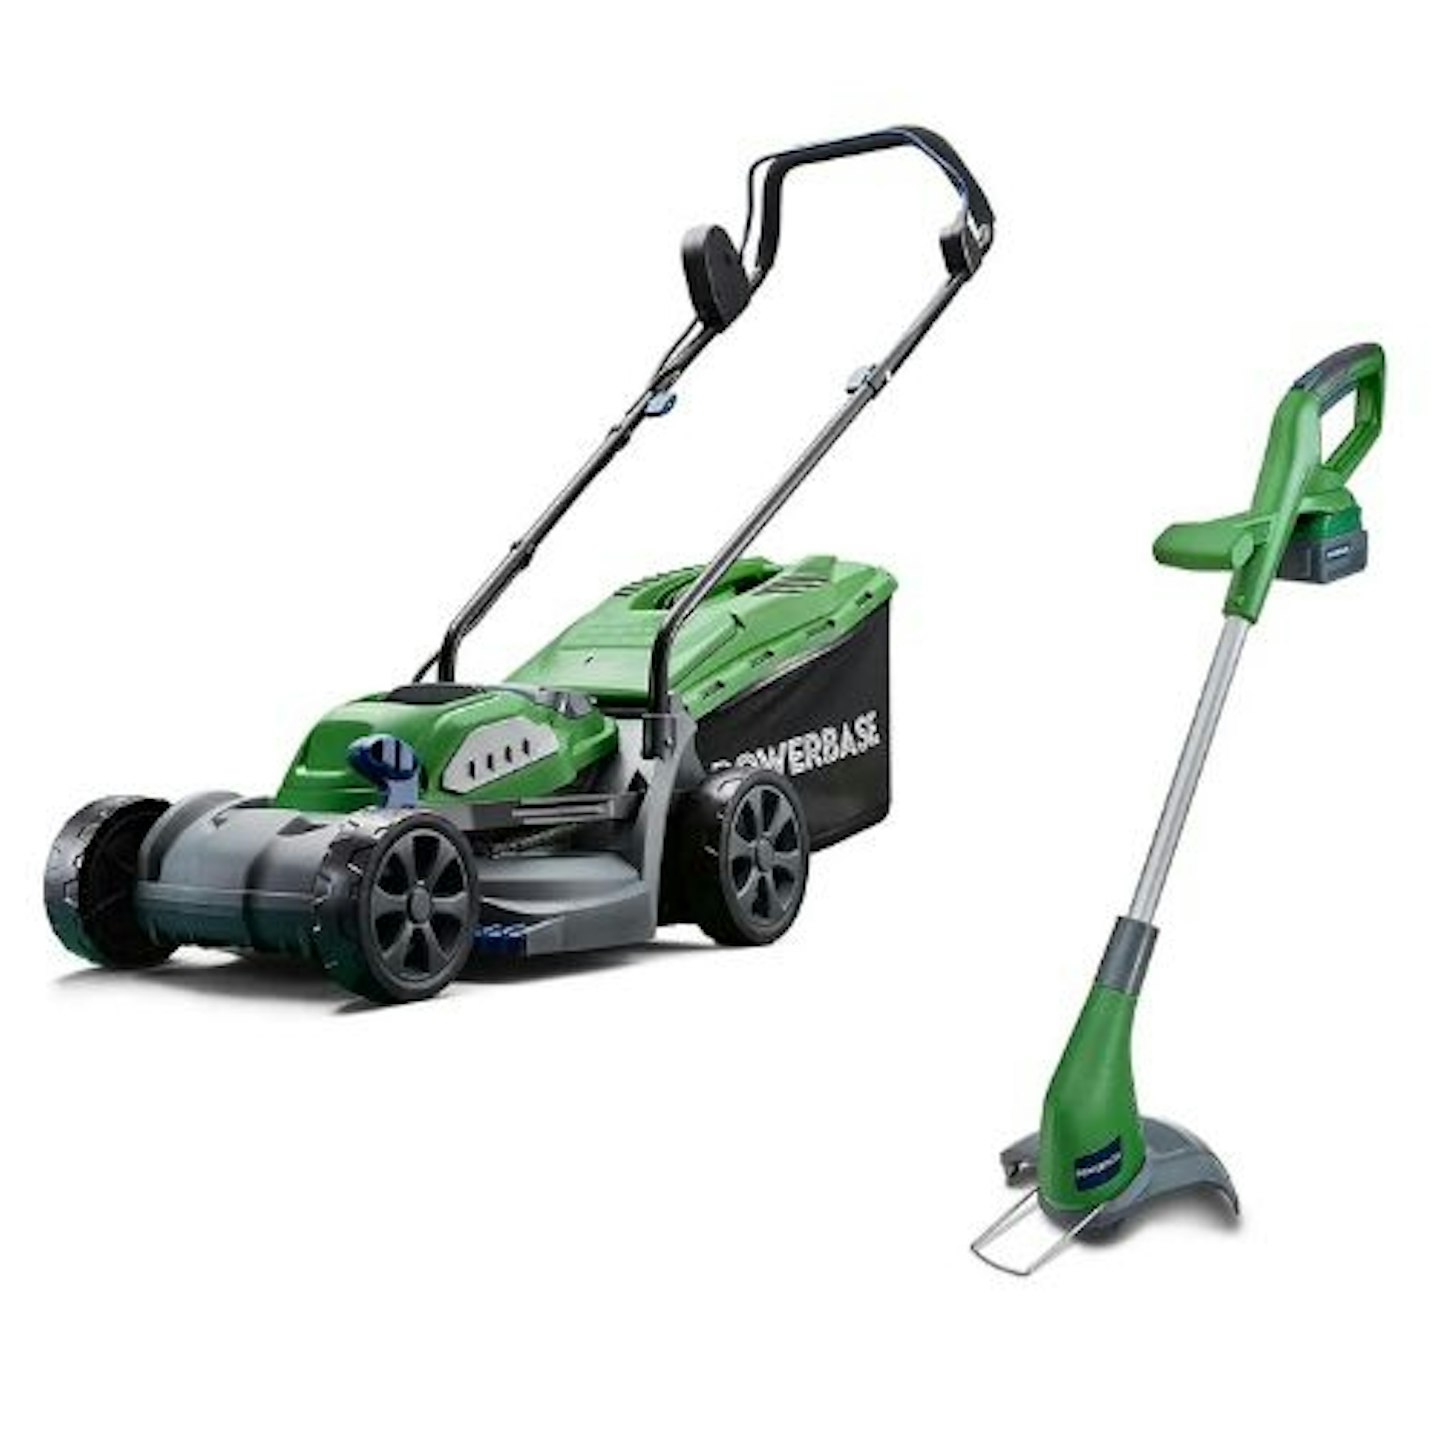 Powerbase 20V Cordless Lawn Mower and Trimmer Twin Pack